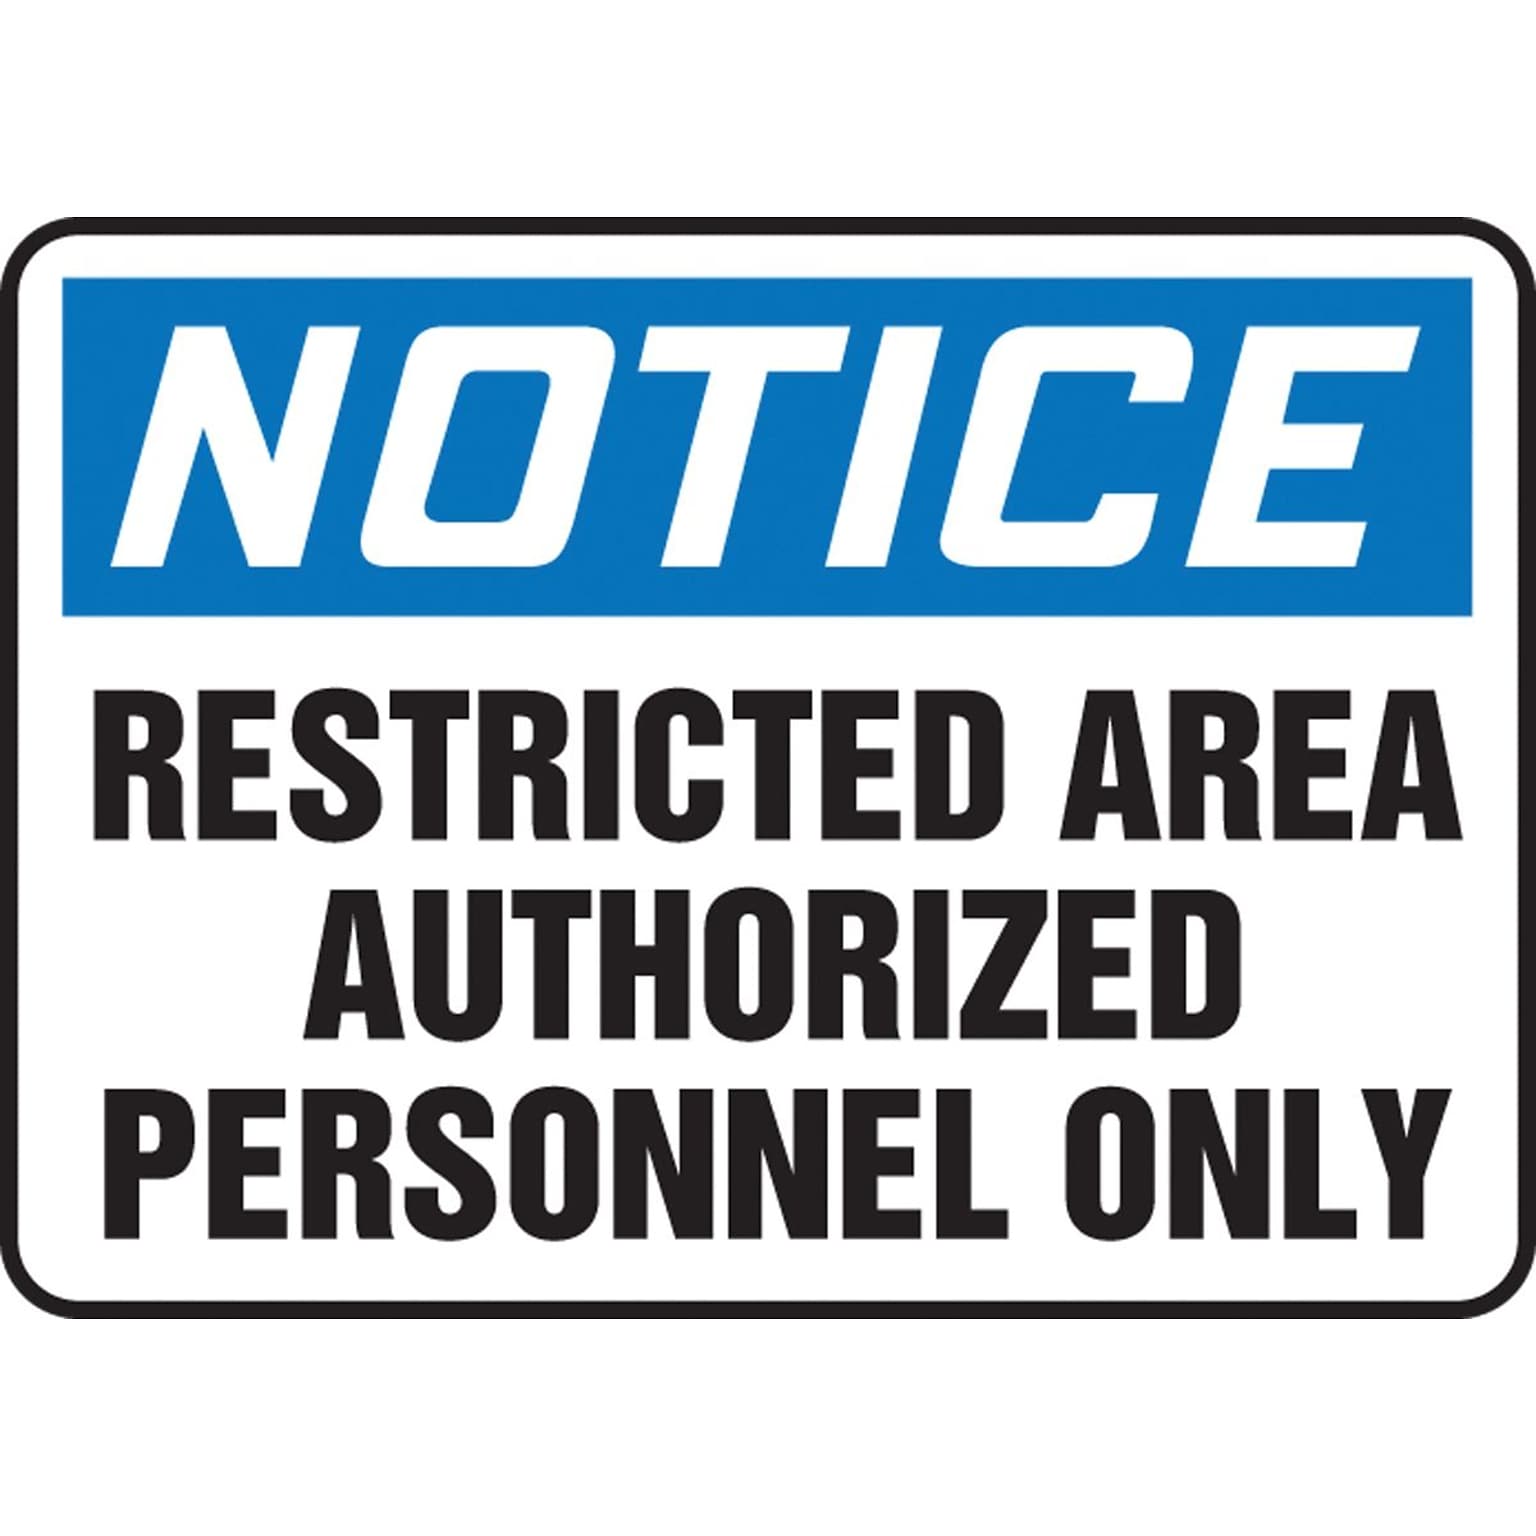 Accuform 7 x 10 Aluminum Safety Sign NOTICE RESTRICTED AREA.., Blue/Black On White (MADC807VA)